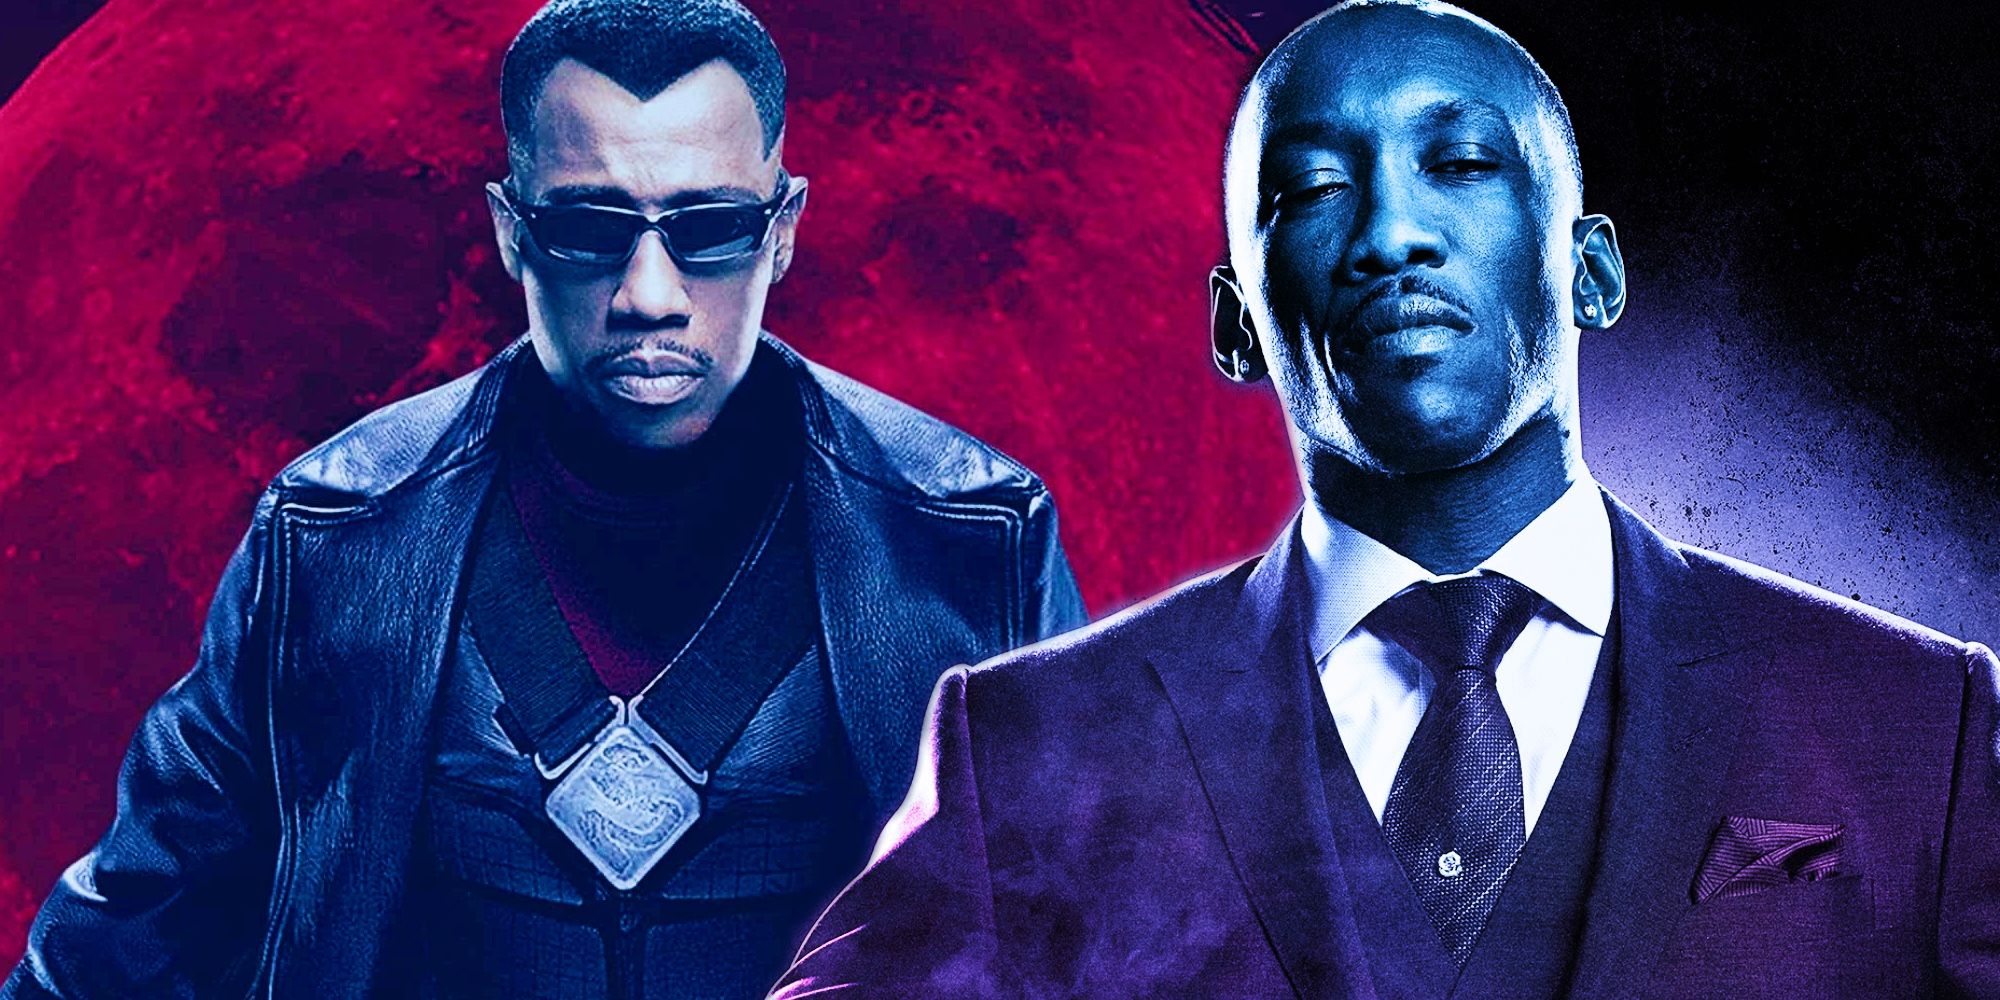 mahershala ali's blade is already different from snipes;